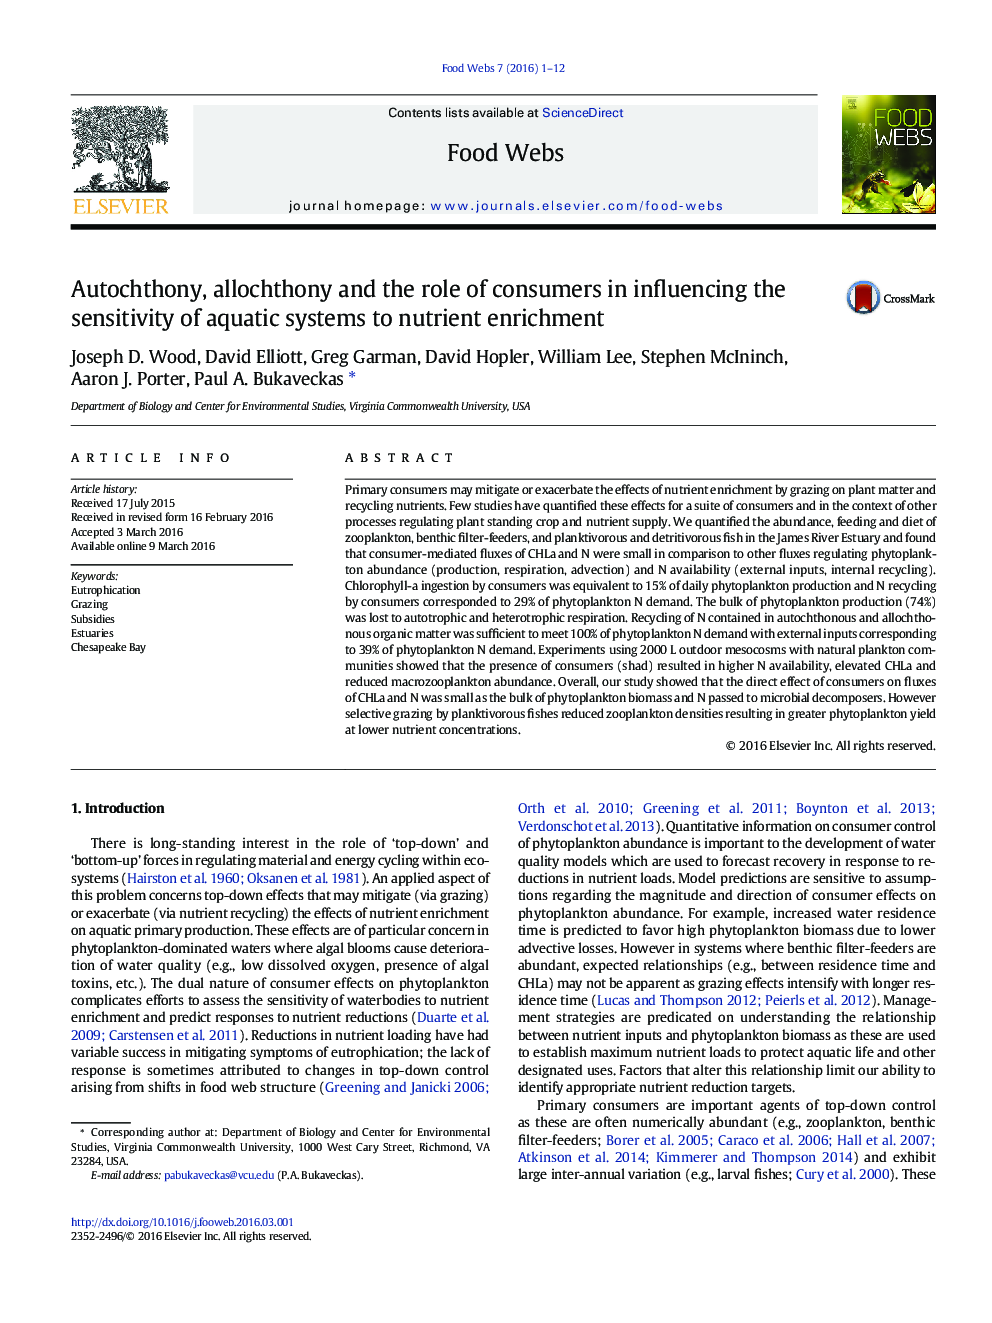 Autochthony, allochthony and the role of consumers in influencing the sensitivity of aquatic systems to nutrient enrichment